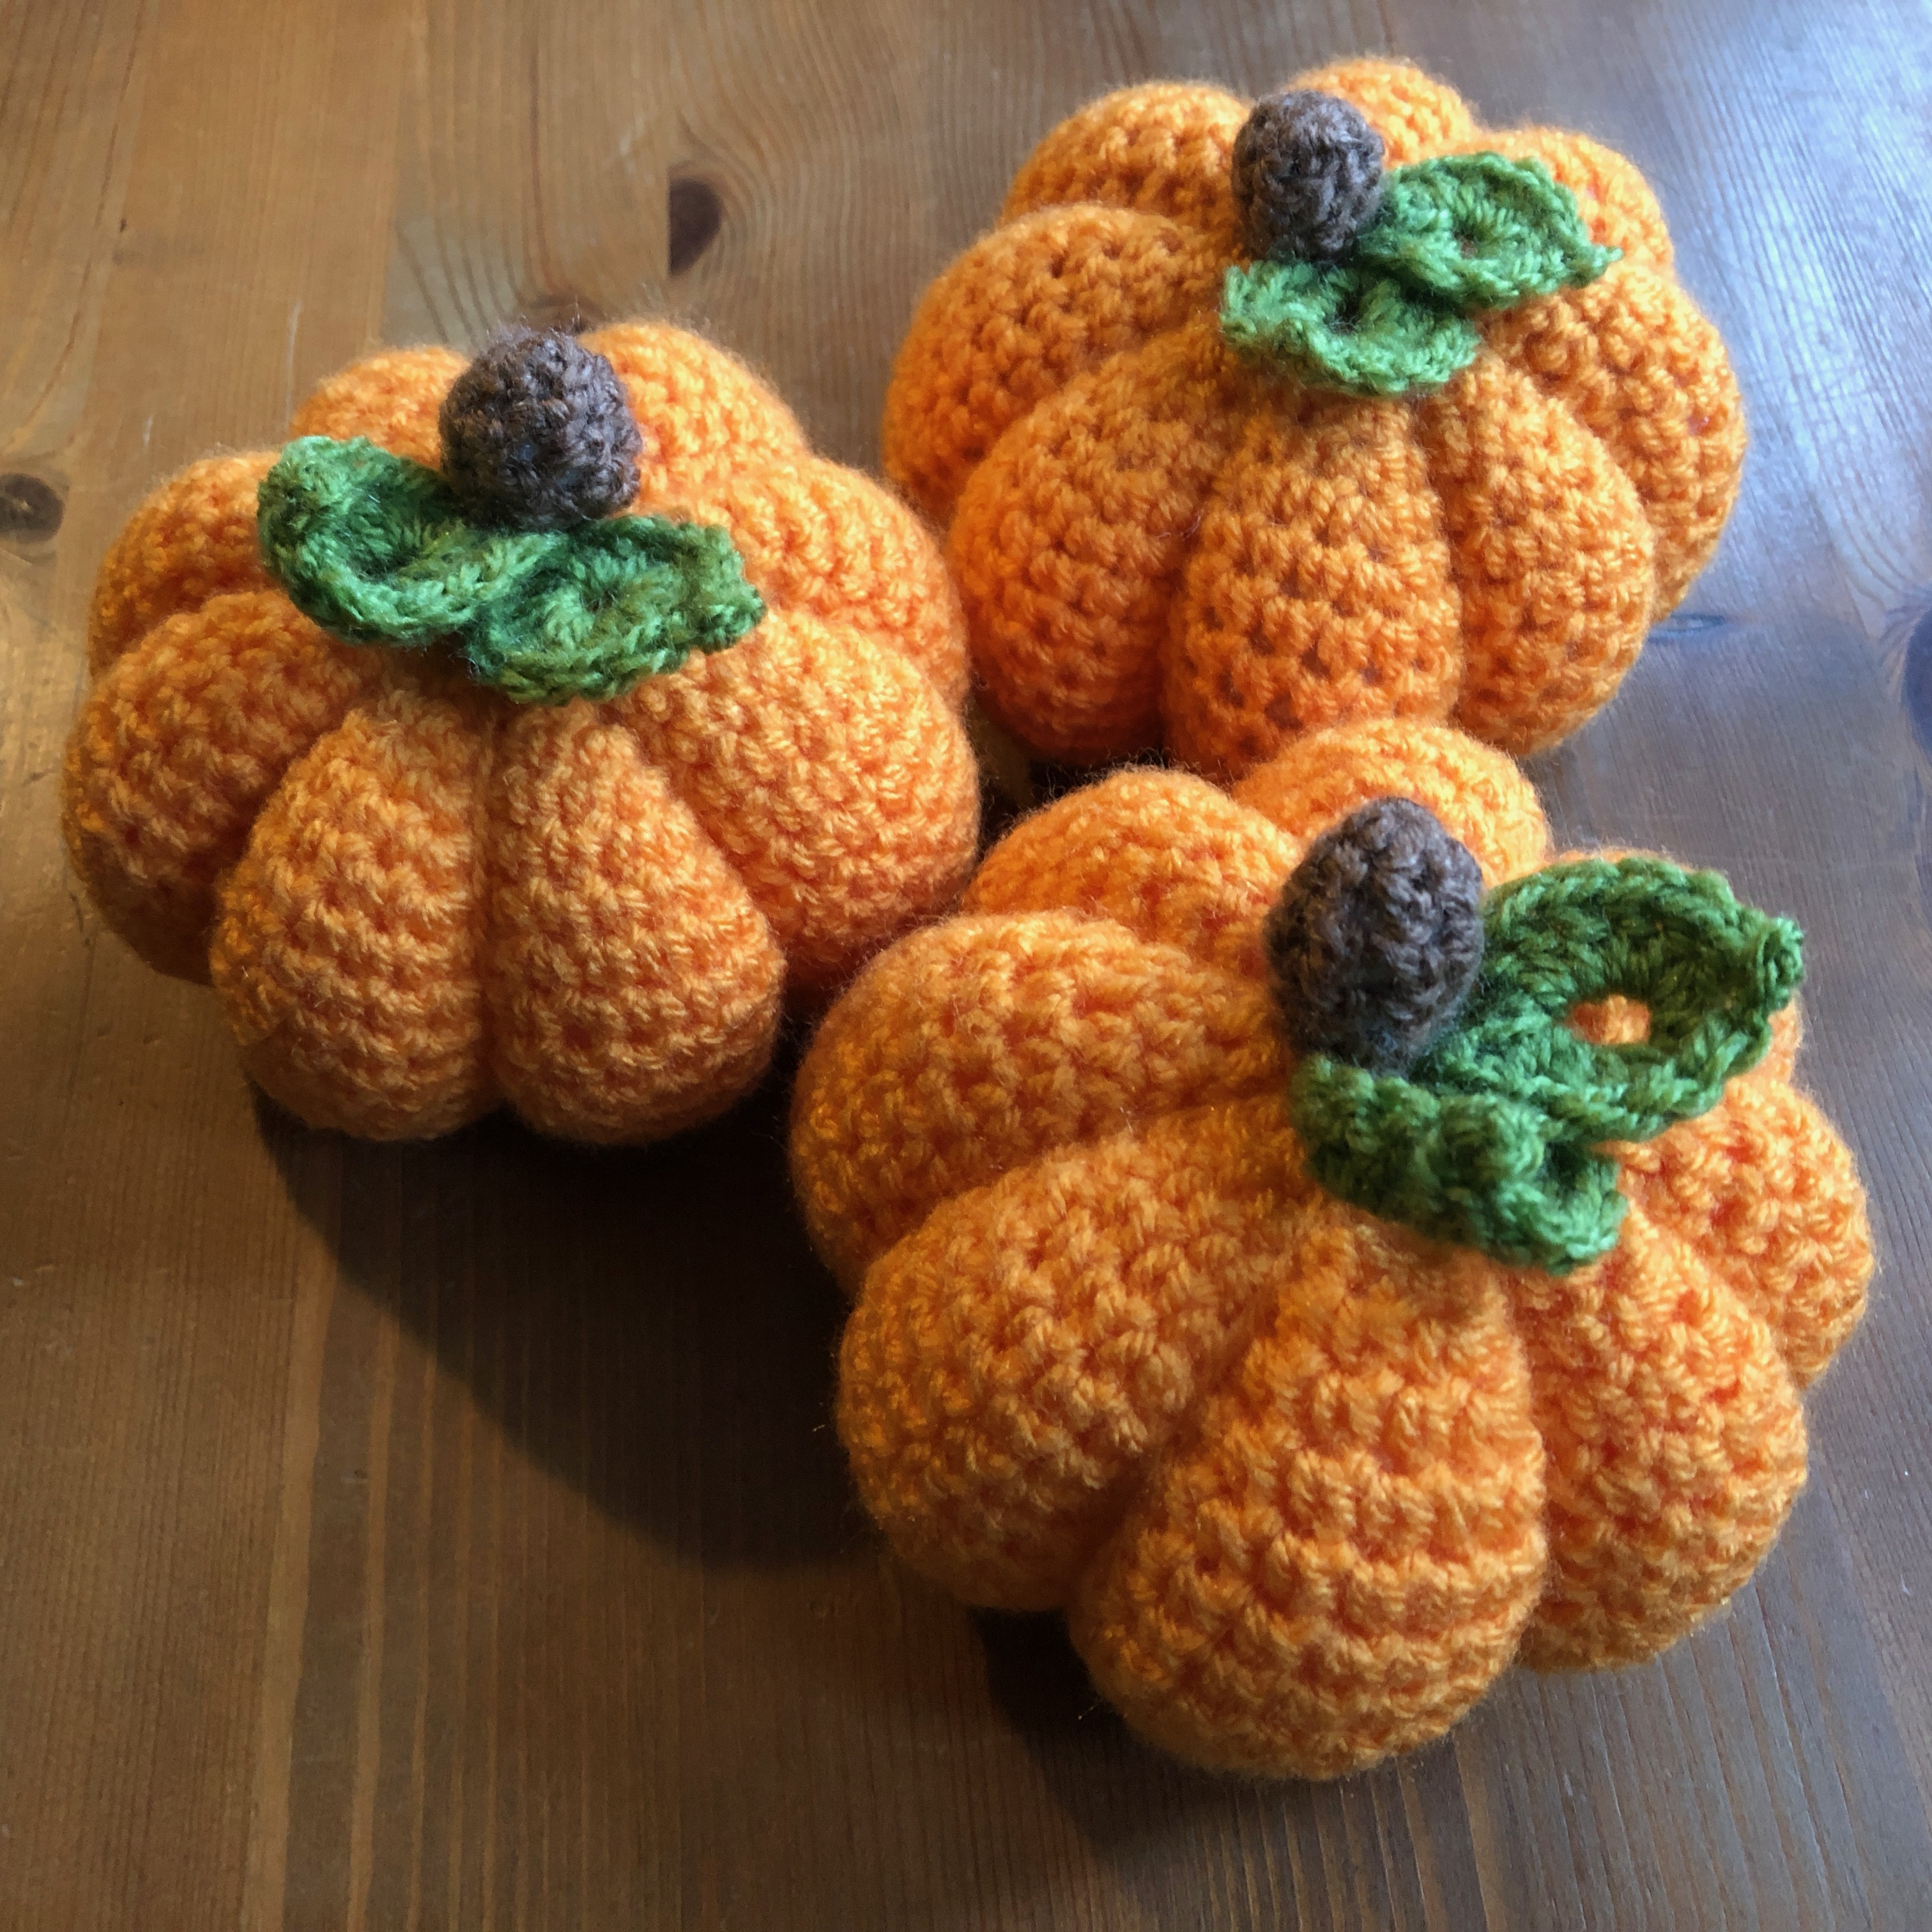 Hand made, crocheted pumpkins in orange, with brown stalk and green leaves.